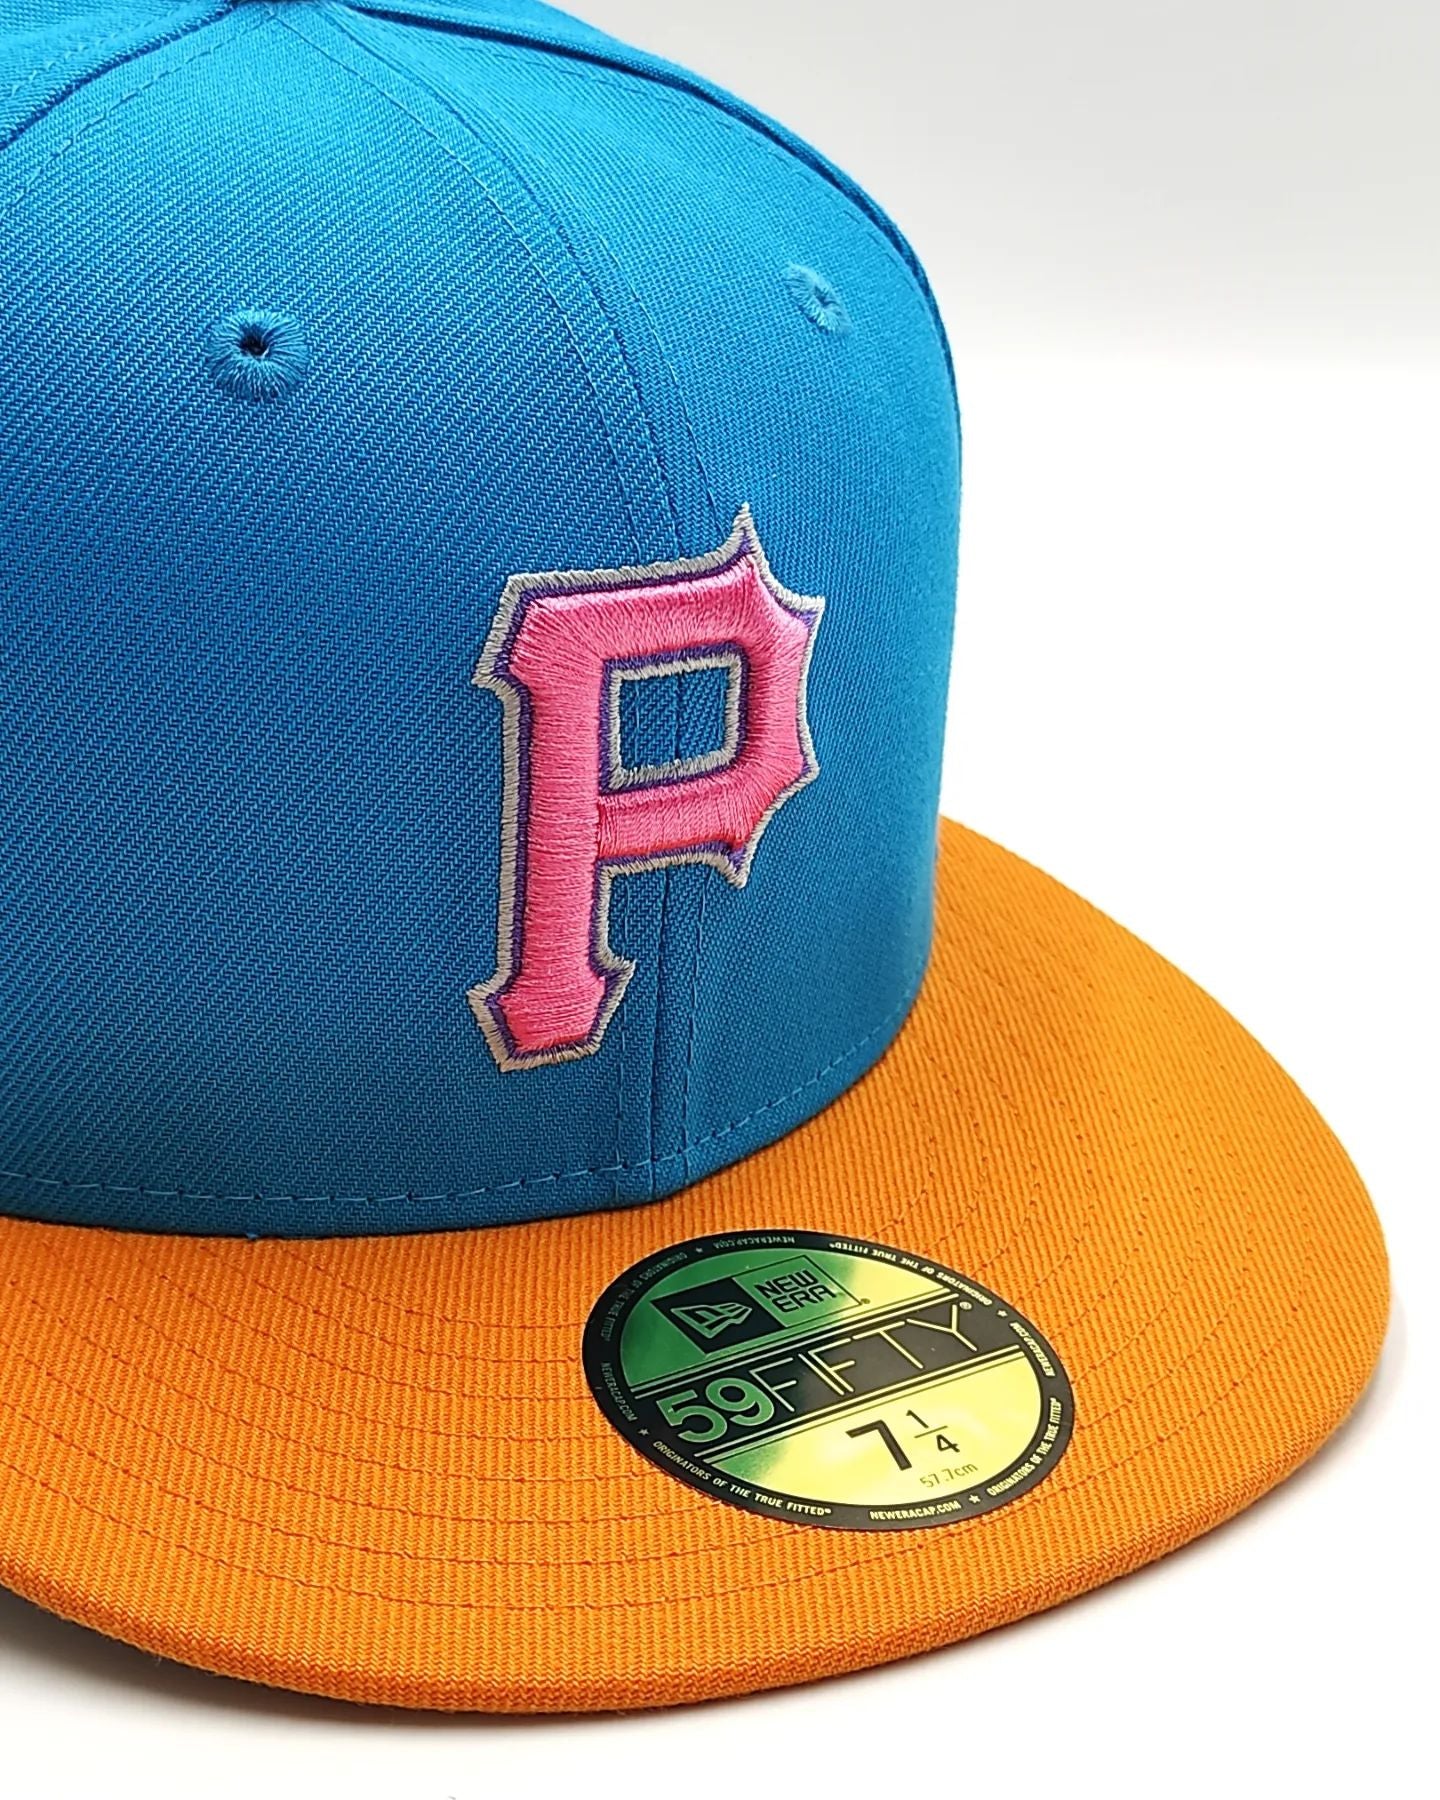 Exclusivo New Era 59Fifty Aux Pack Solo Pittsburgh Pirates 2006 All Star Game Patch Hat - Azul claro, naranja, rosa